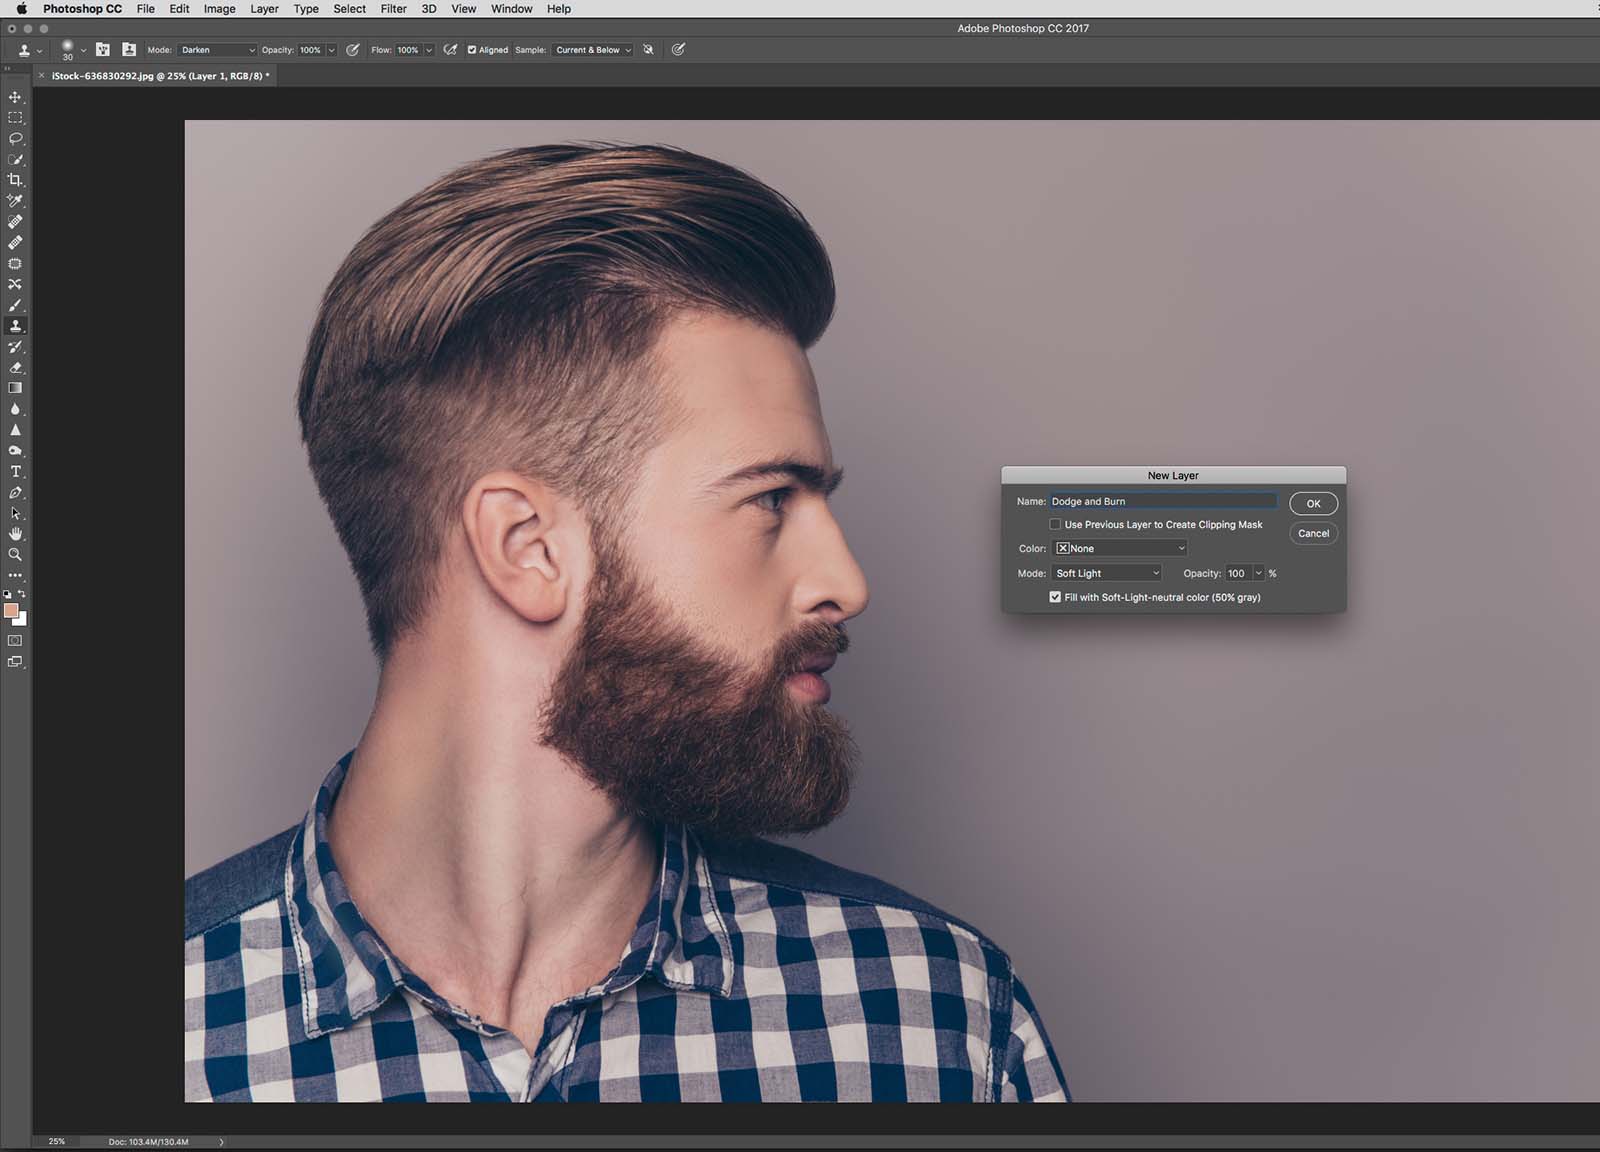 How to Make a Picture Look Like a Painting in Photoshop